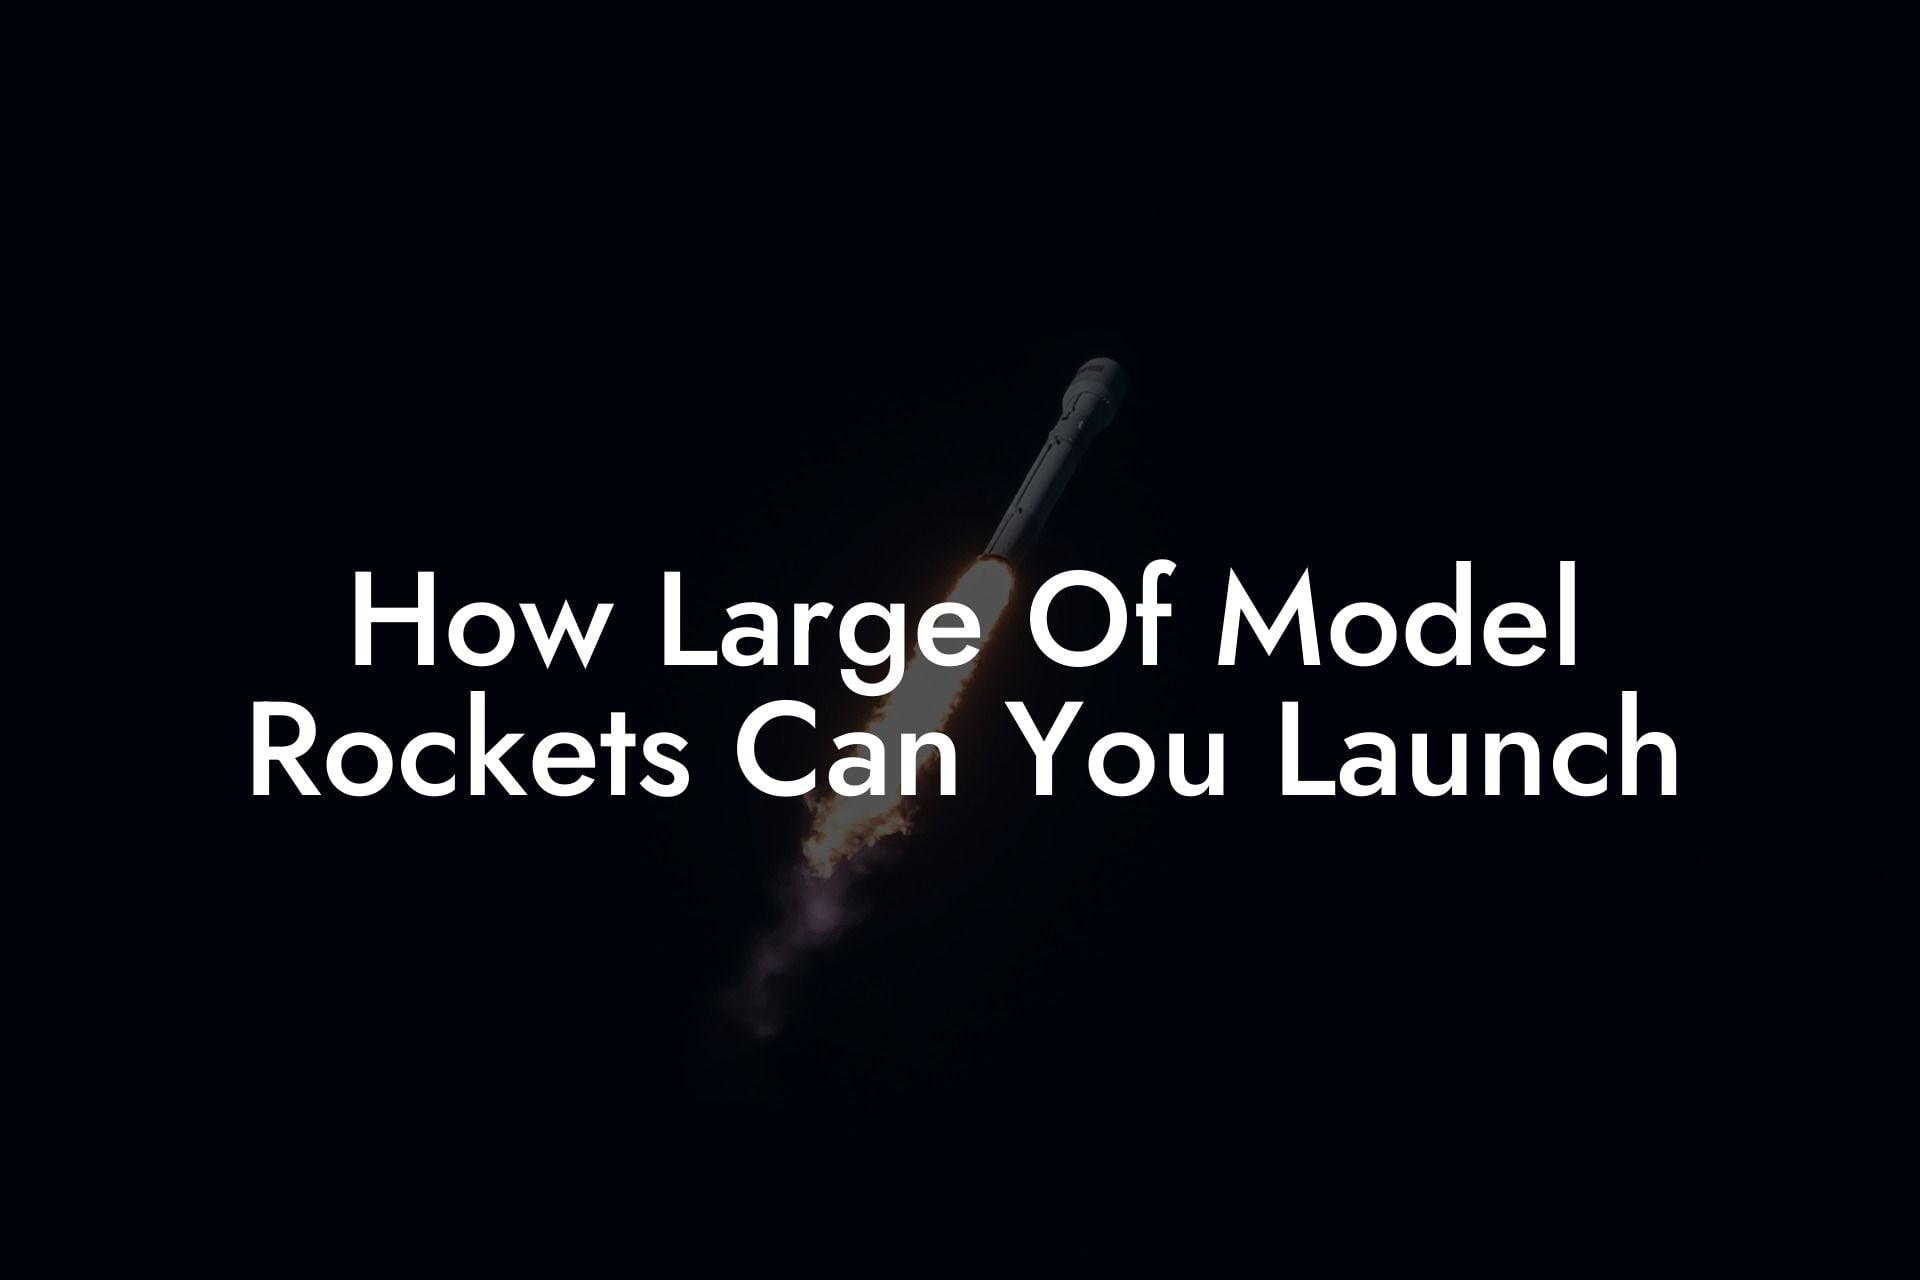 How Large Of Model Rockets Can You Launch